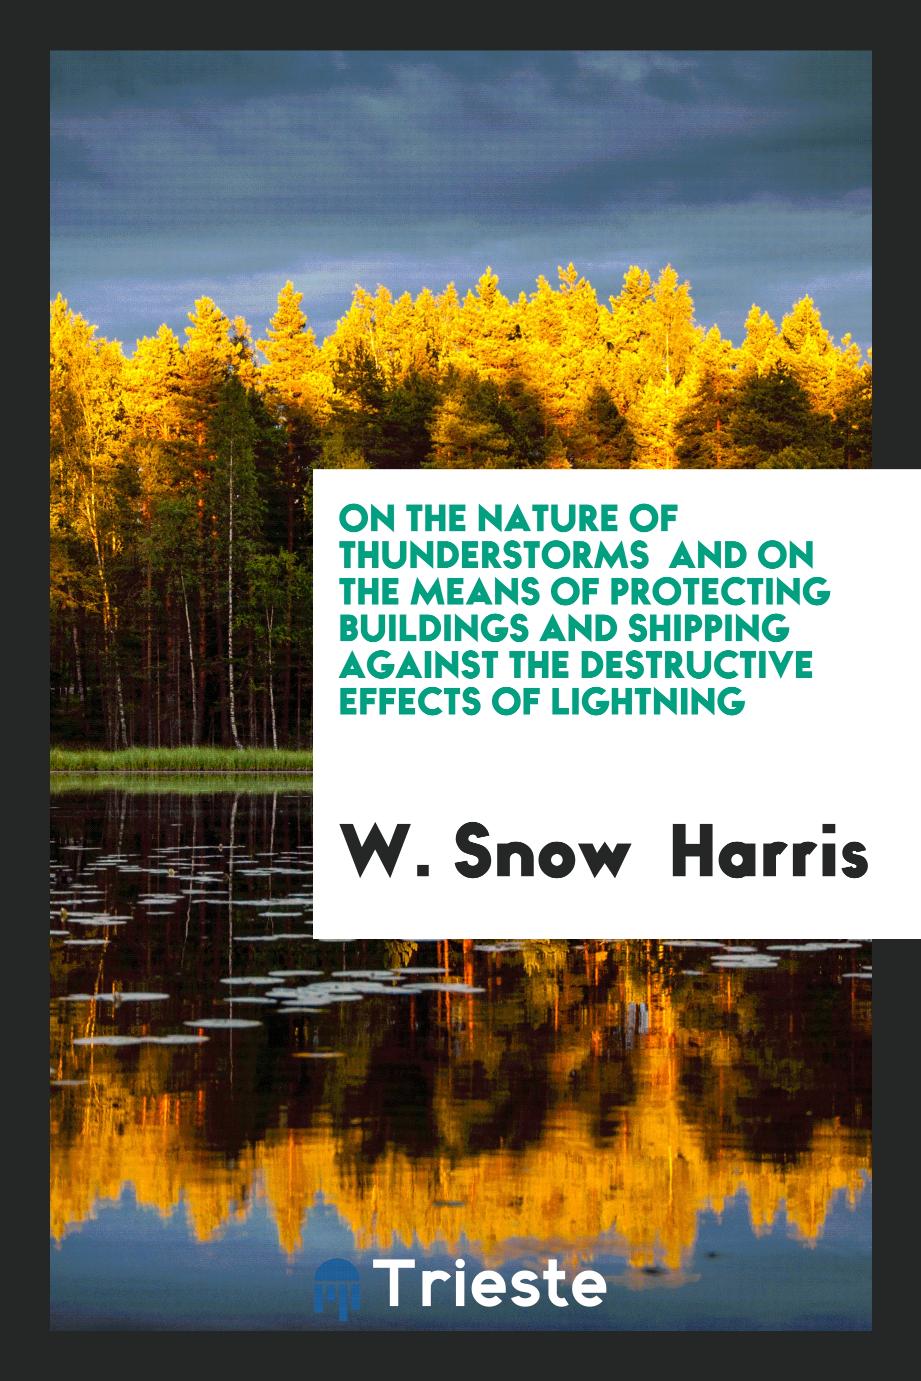 On the Nature of Thunderstorms and on the Means of Protecting Buildings and Shipping Against the Destructive Effects of Lightning